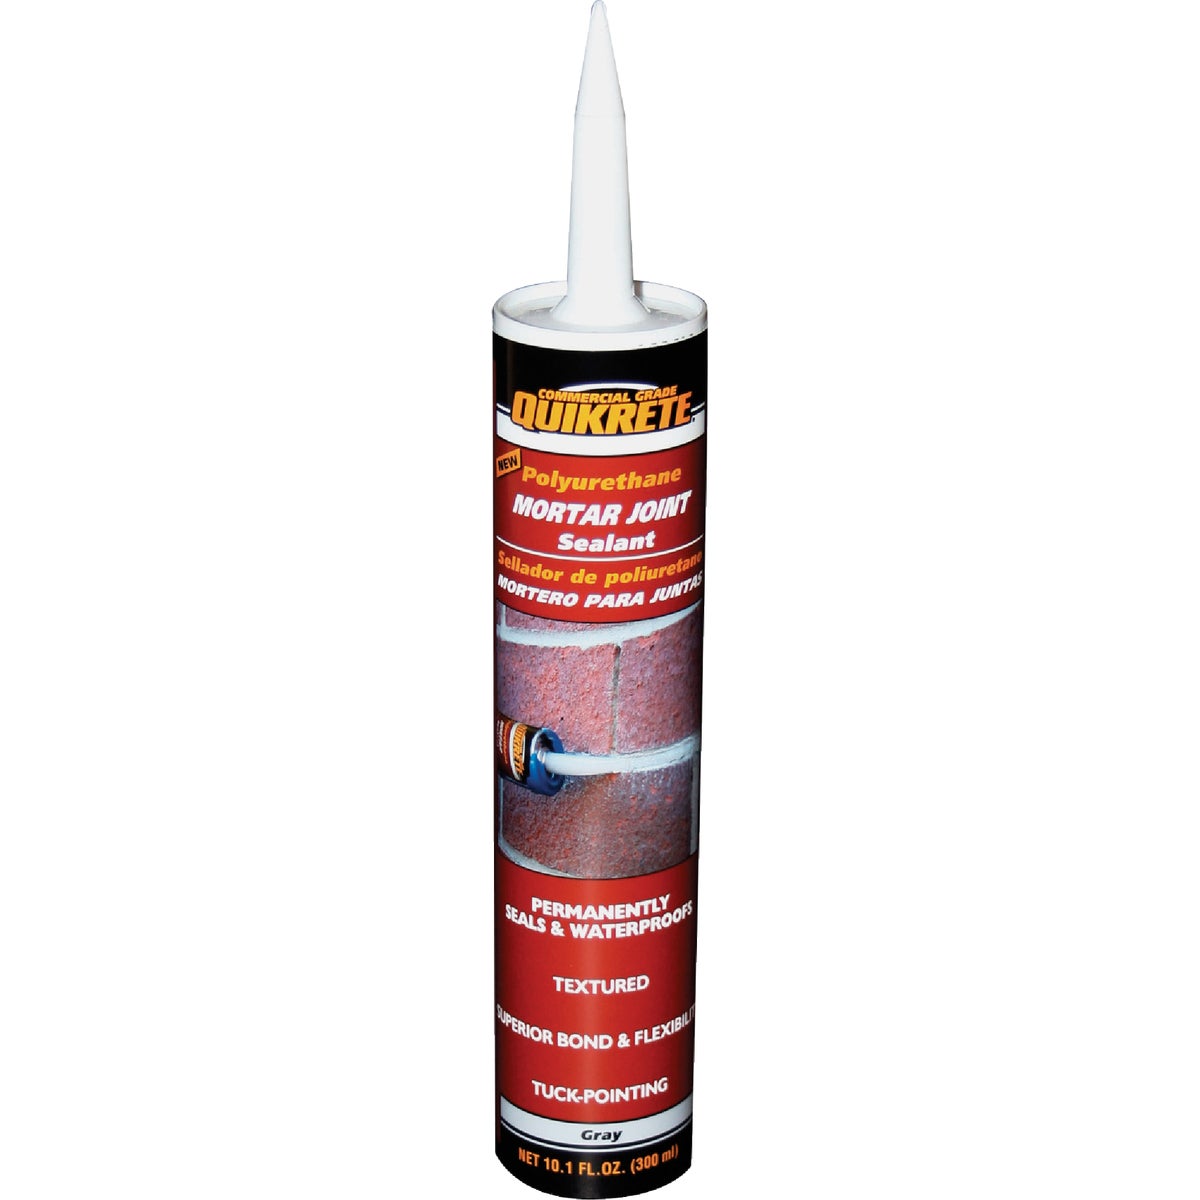 Item 260052, Polyurethane mortar joint sealant is a textured one component fast curing 